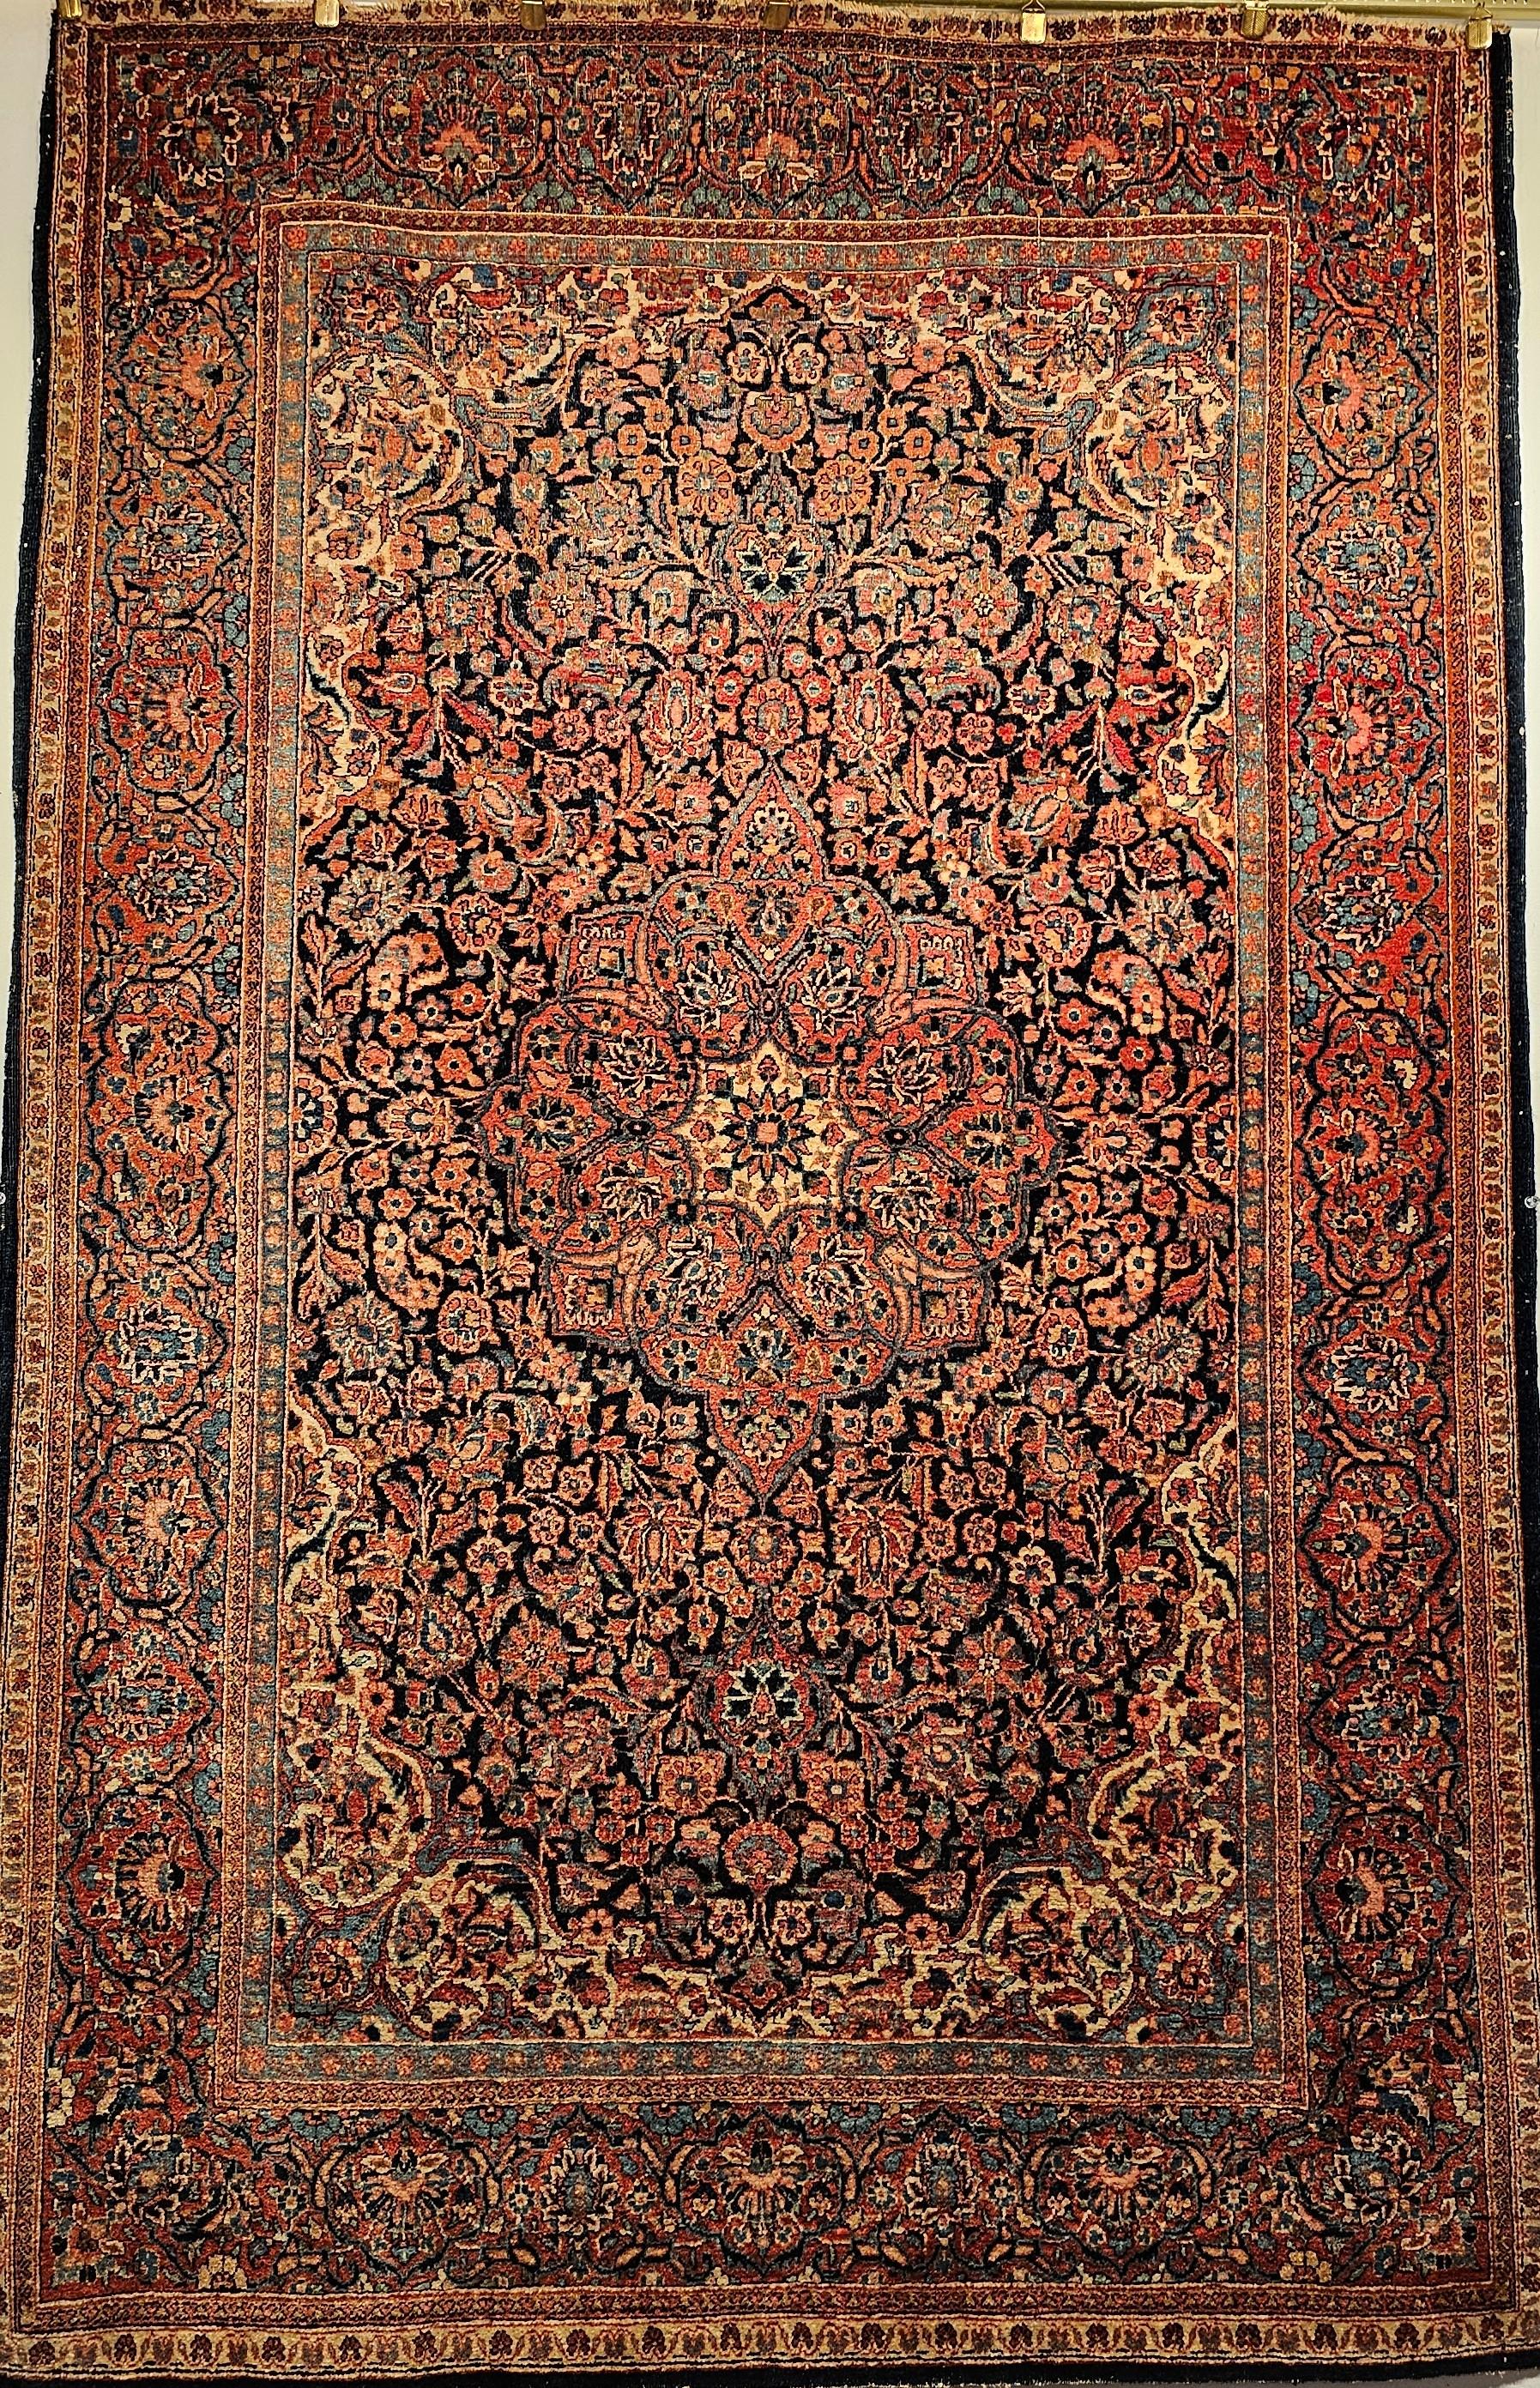 A beautiful Persian Kashan in a classic floral design from the early 1900s in Navy blue, French blue, ivory and rust red.   The beautiful French blue accent color is used extensively throughout the rug which makes it wonderful color combination. 
